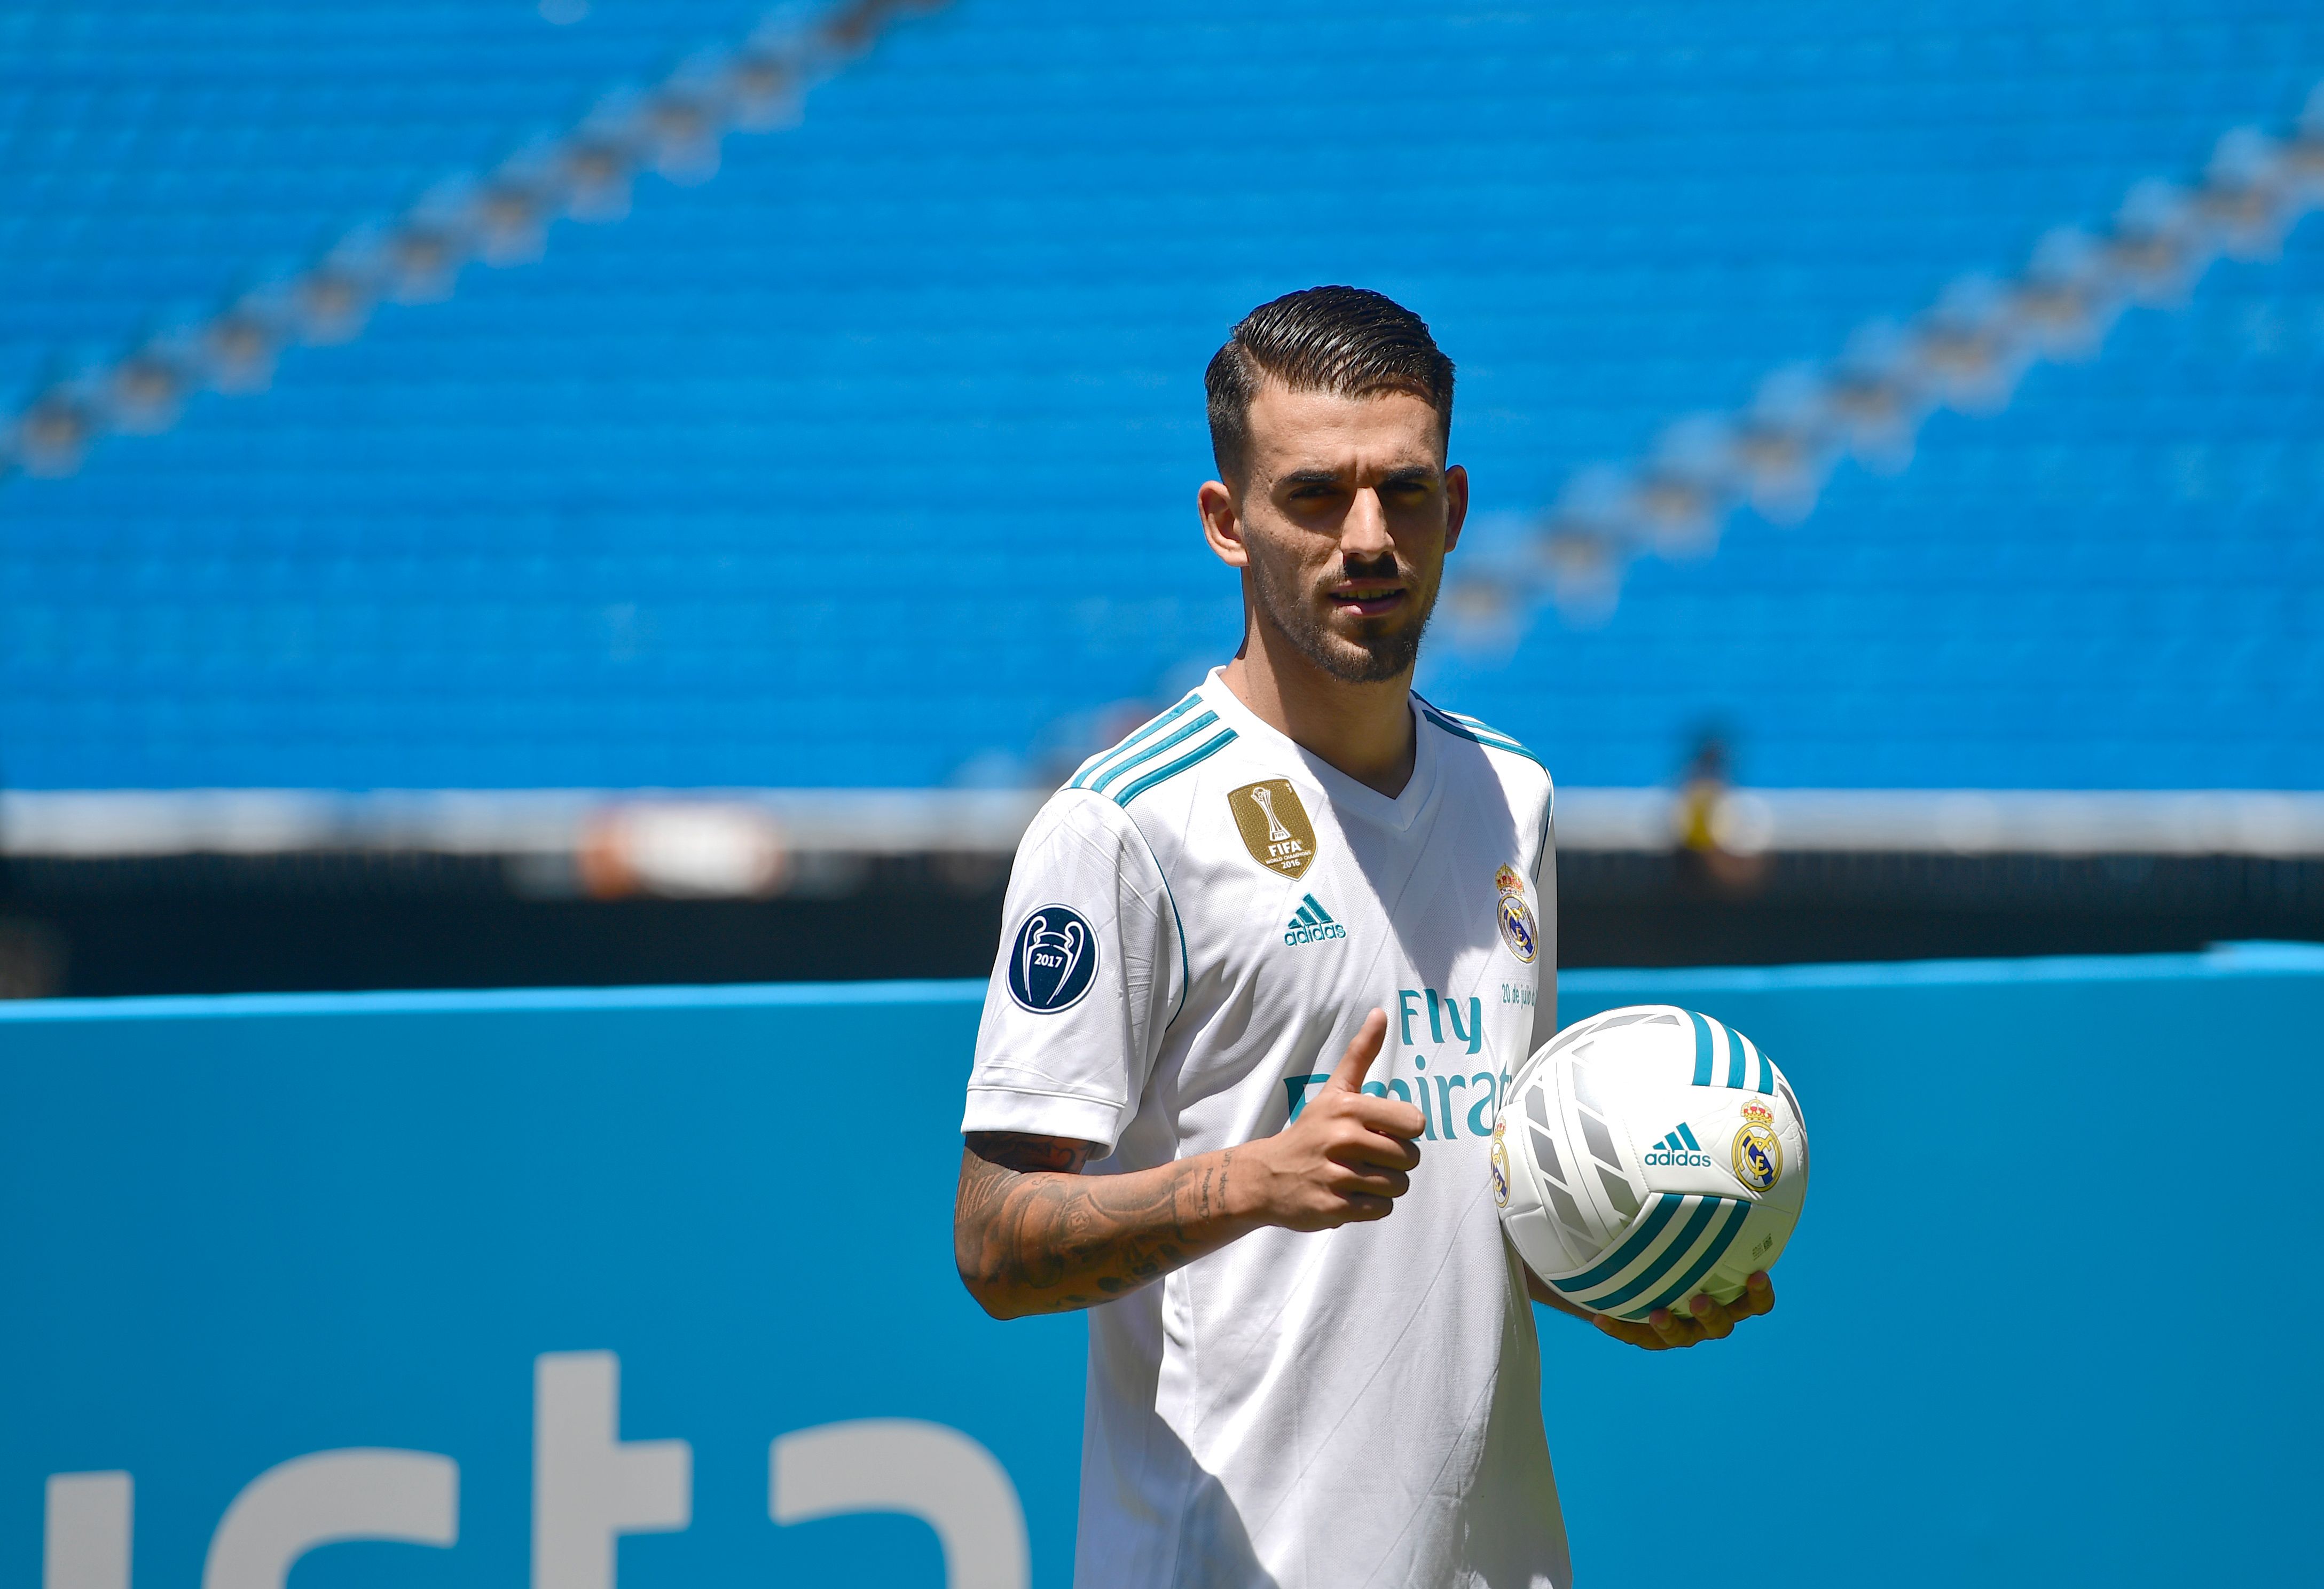 Spanish midfielder Dani Ceballos gives a thumb up as he poses on the pitch during his presentation as new football player of the Real Madrid CF at the Santiago Bernabeu stadium in Madrid on July 20, 2017. / AFP PHOTO / PIERRE-PHILIPPE MARCOU        (Photo credit should read PIERRE-PHILIPPE MARCOU/AFP/Getty Images)